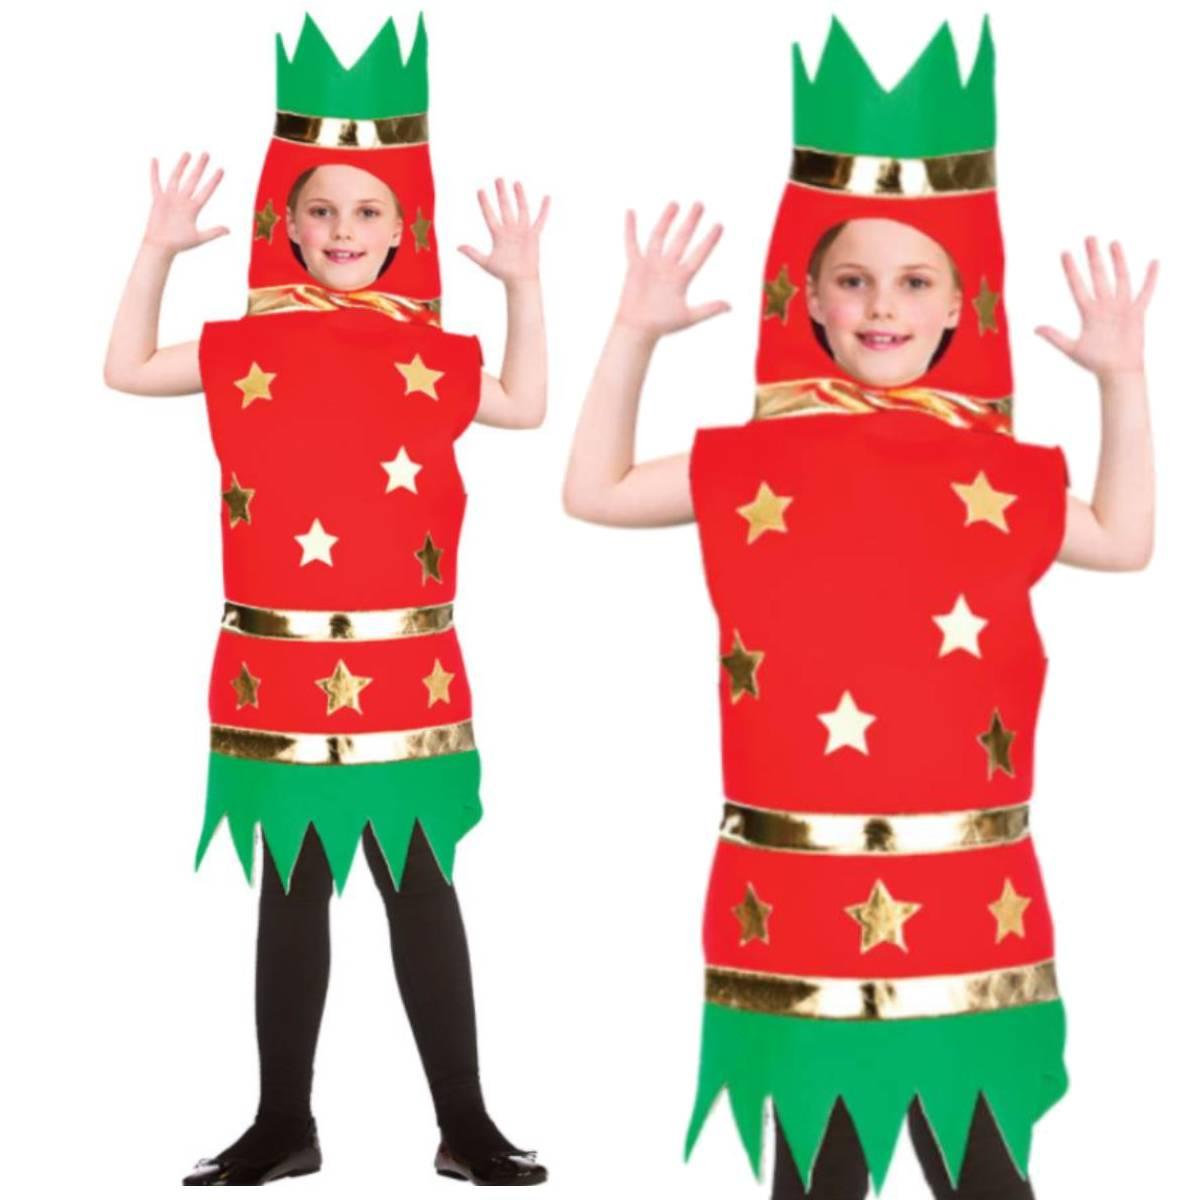 Children's Christmas Cracker fancy dress costume by Wicked XMC-4855 available here at Karnival Costumes online Christmas party shop